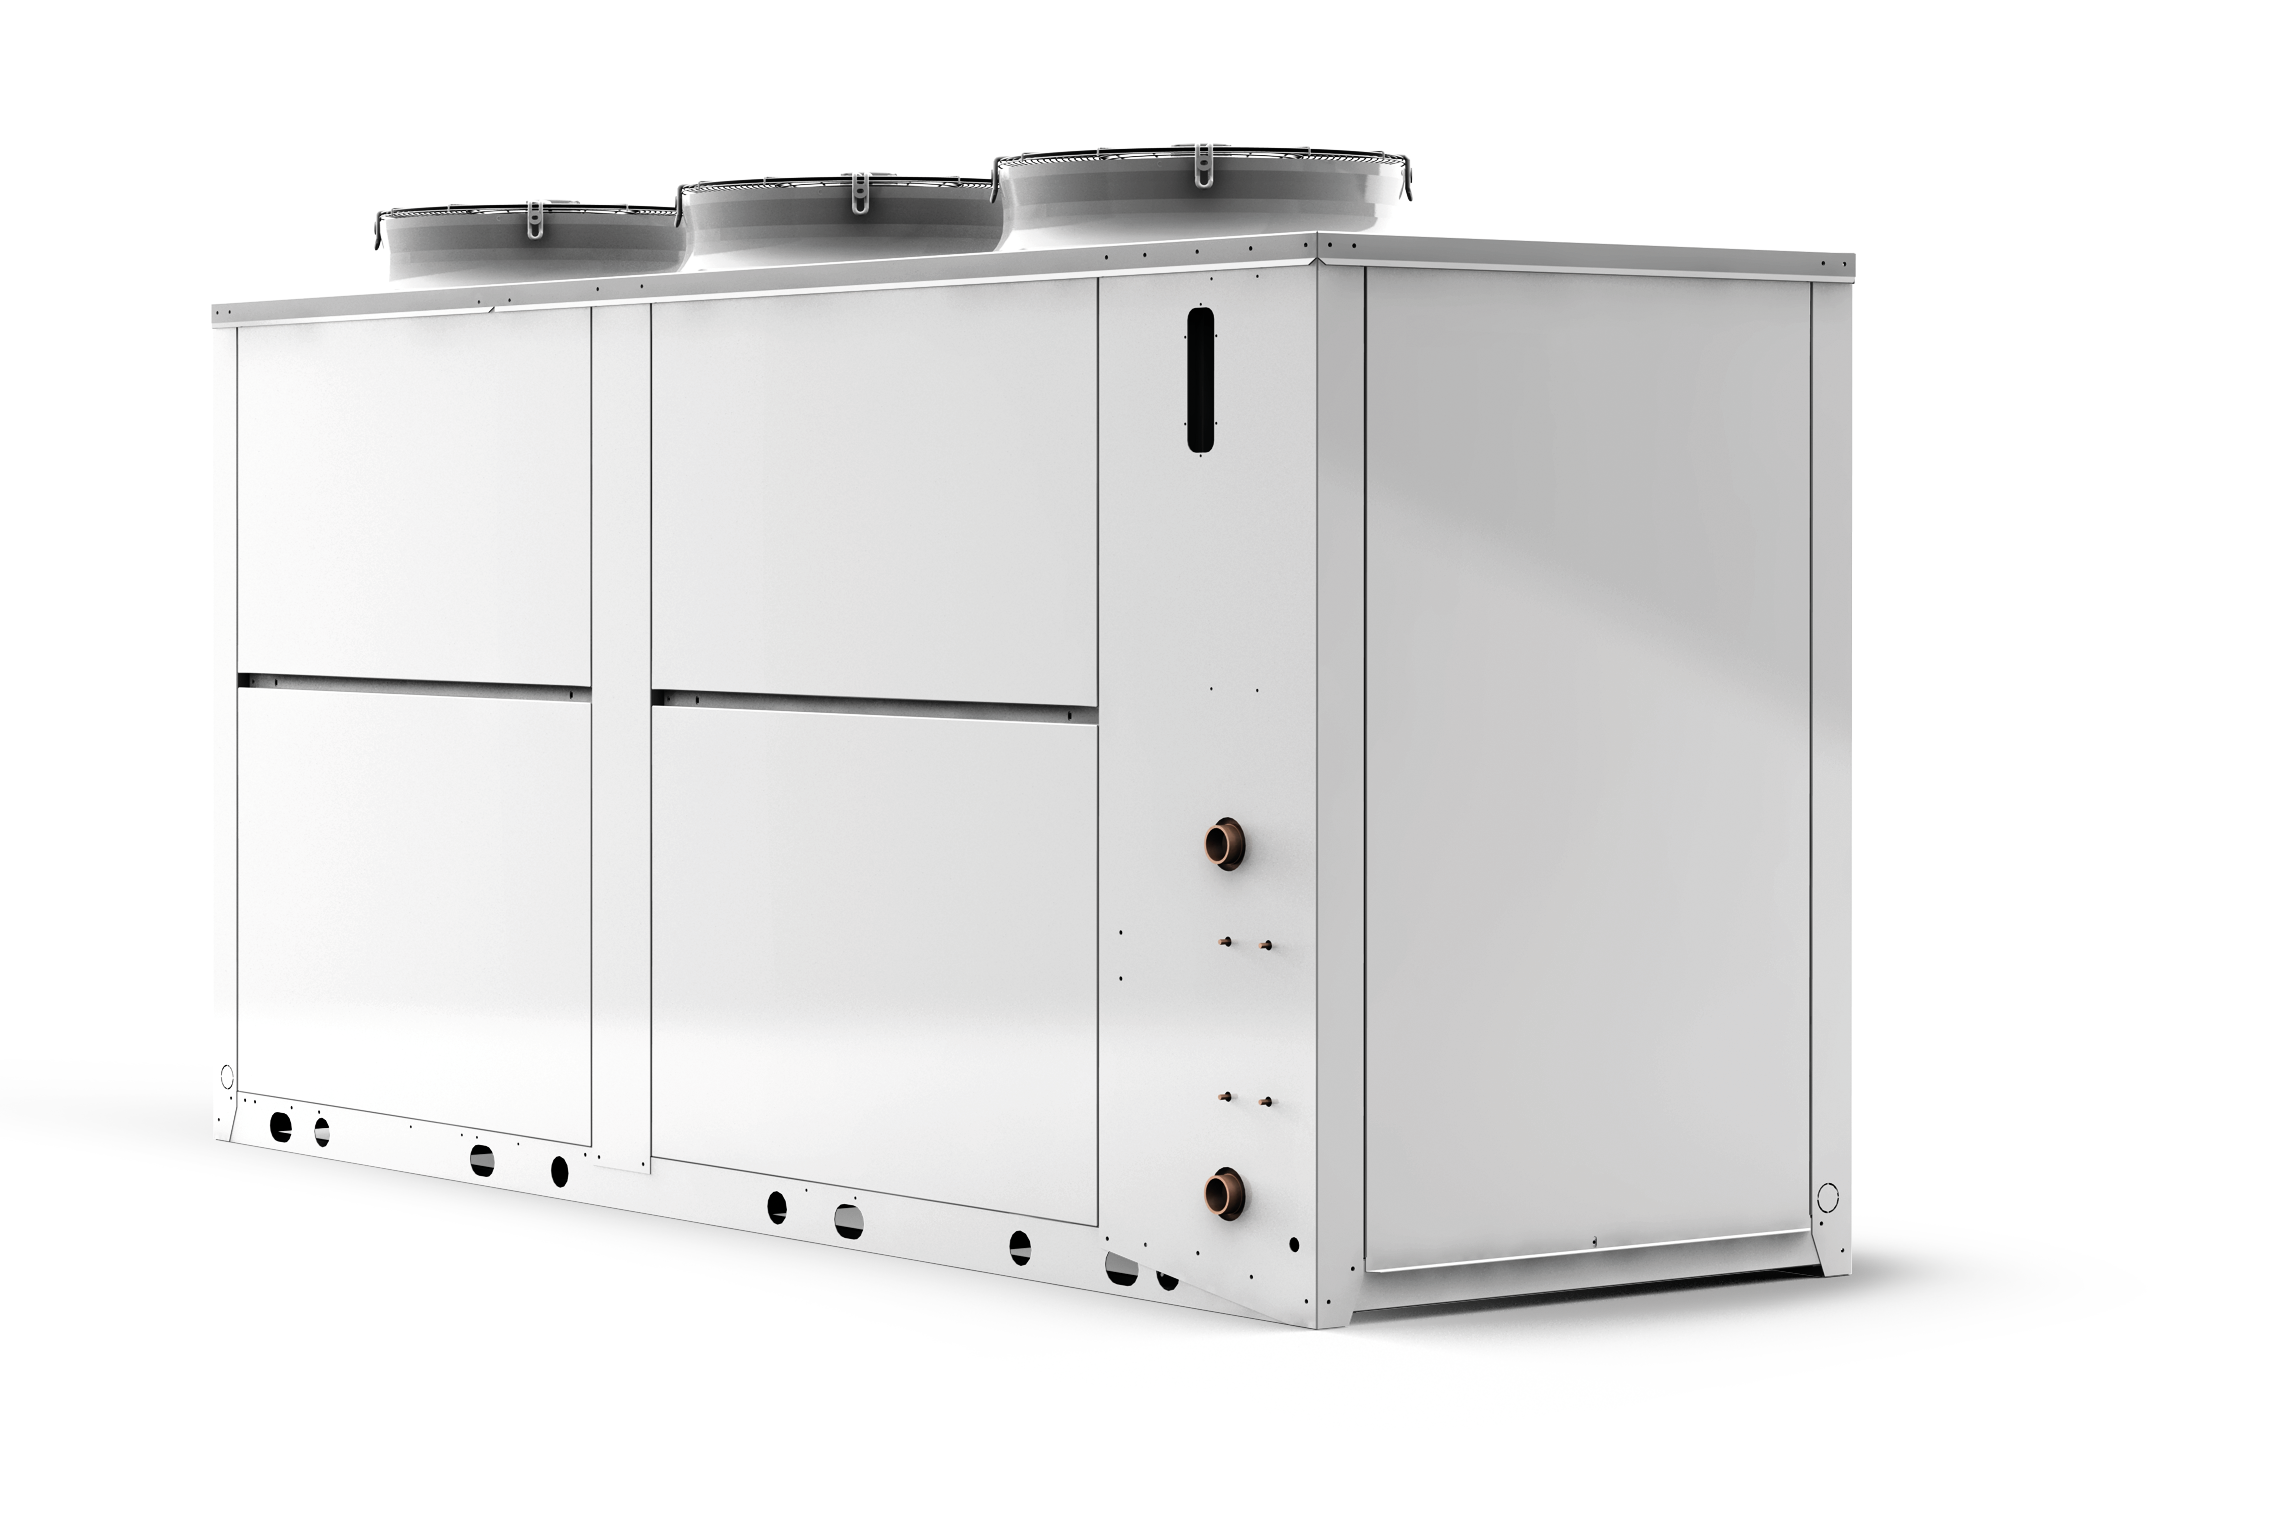 Air-cooled chillers and heat pumps